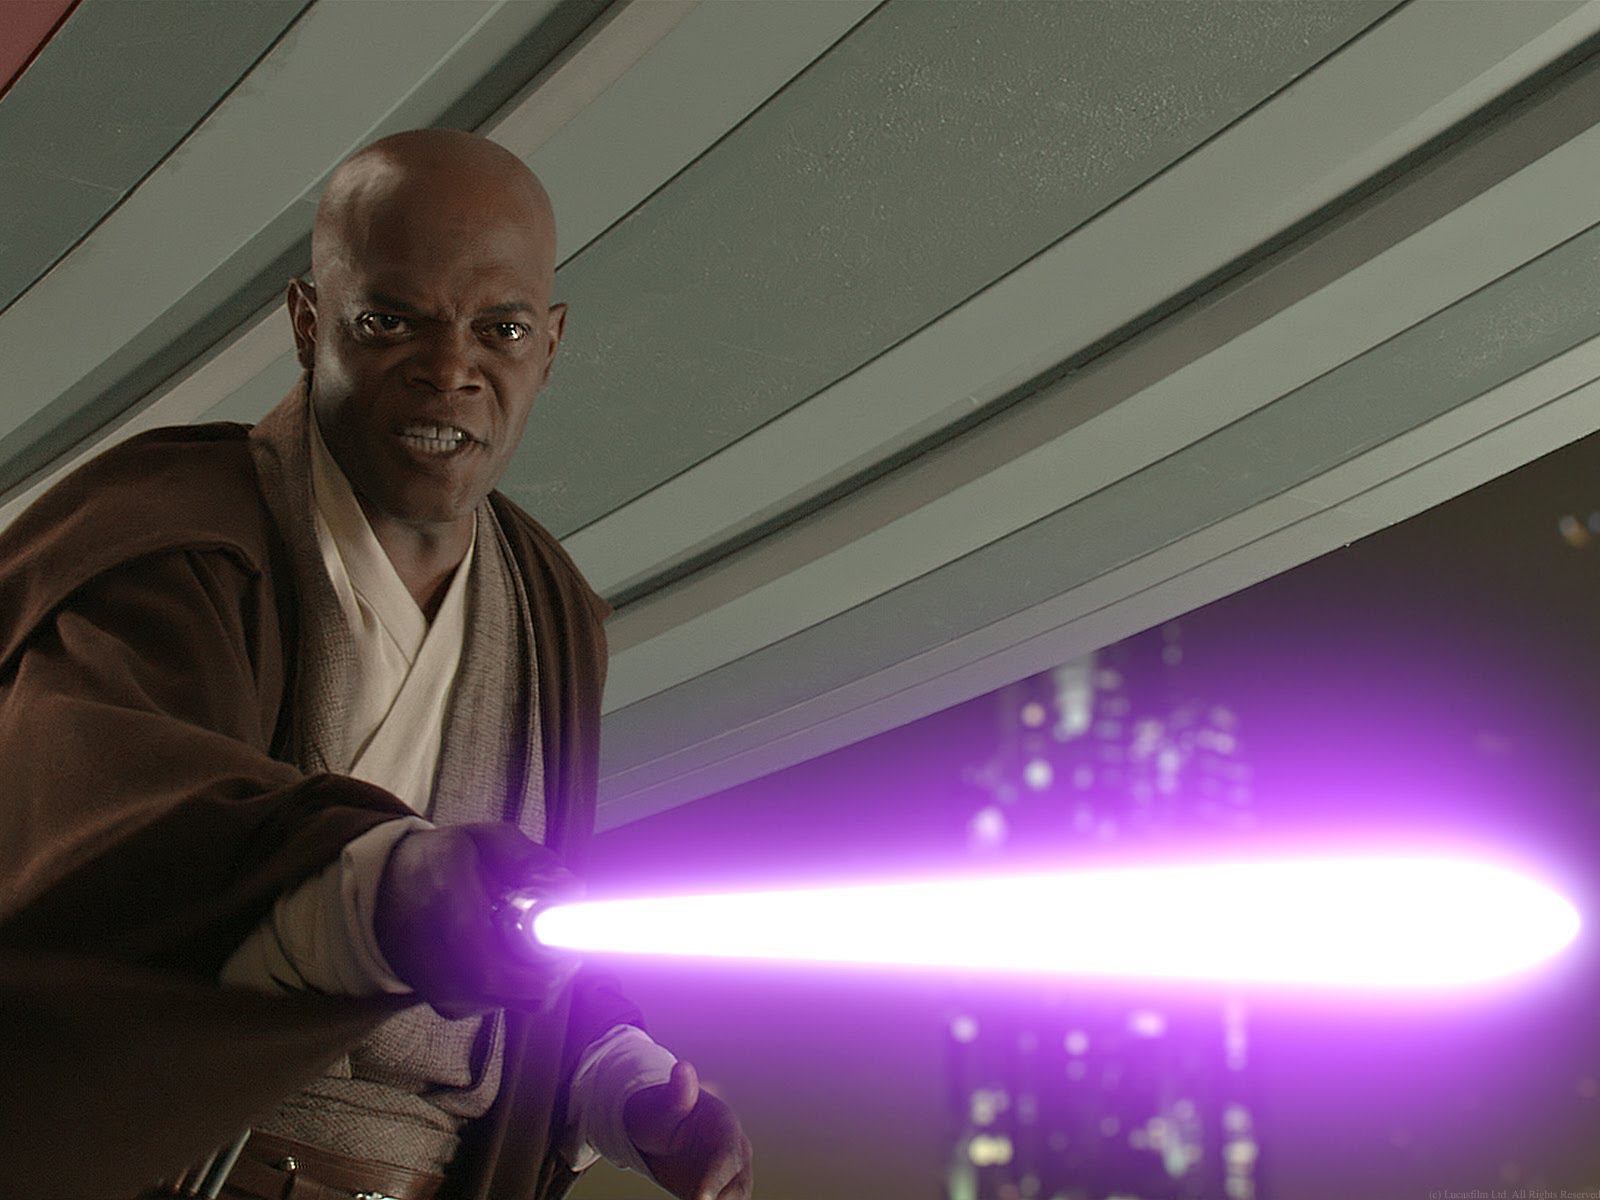 He's too dangerous to be left alive! Blank Meme Template